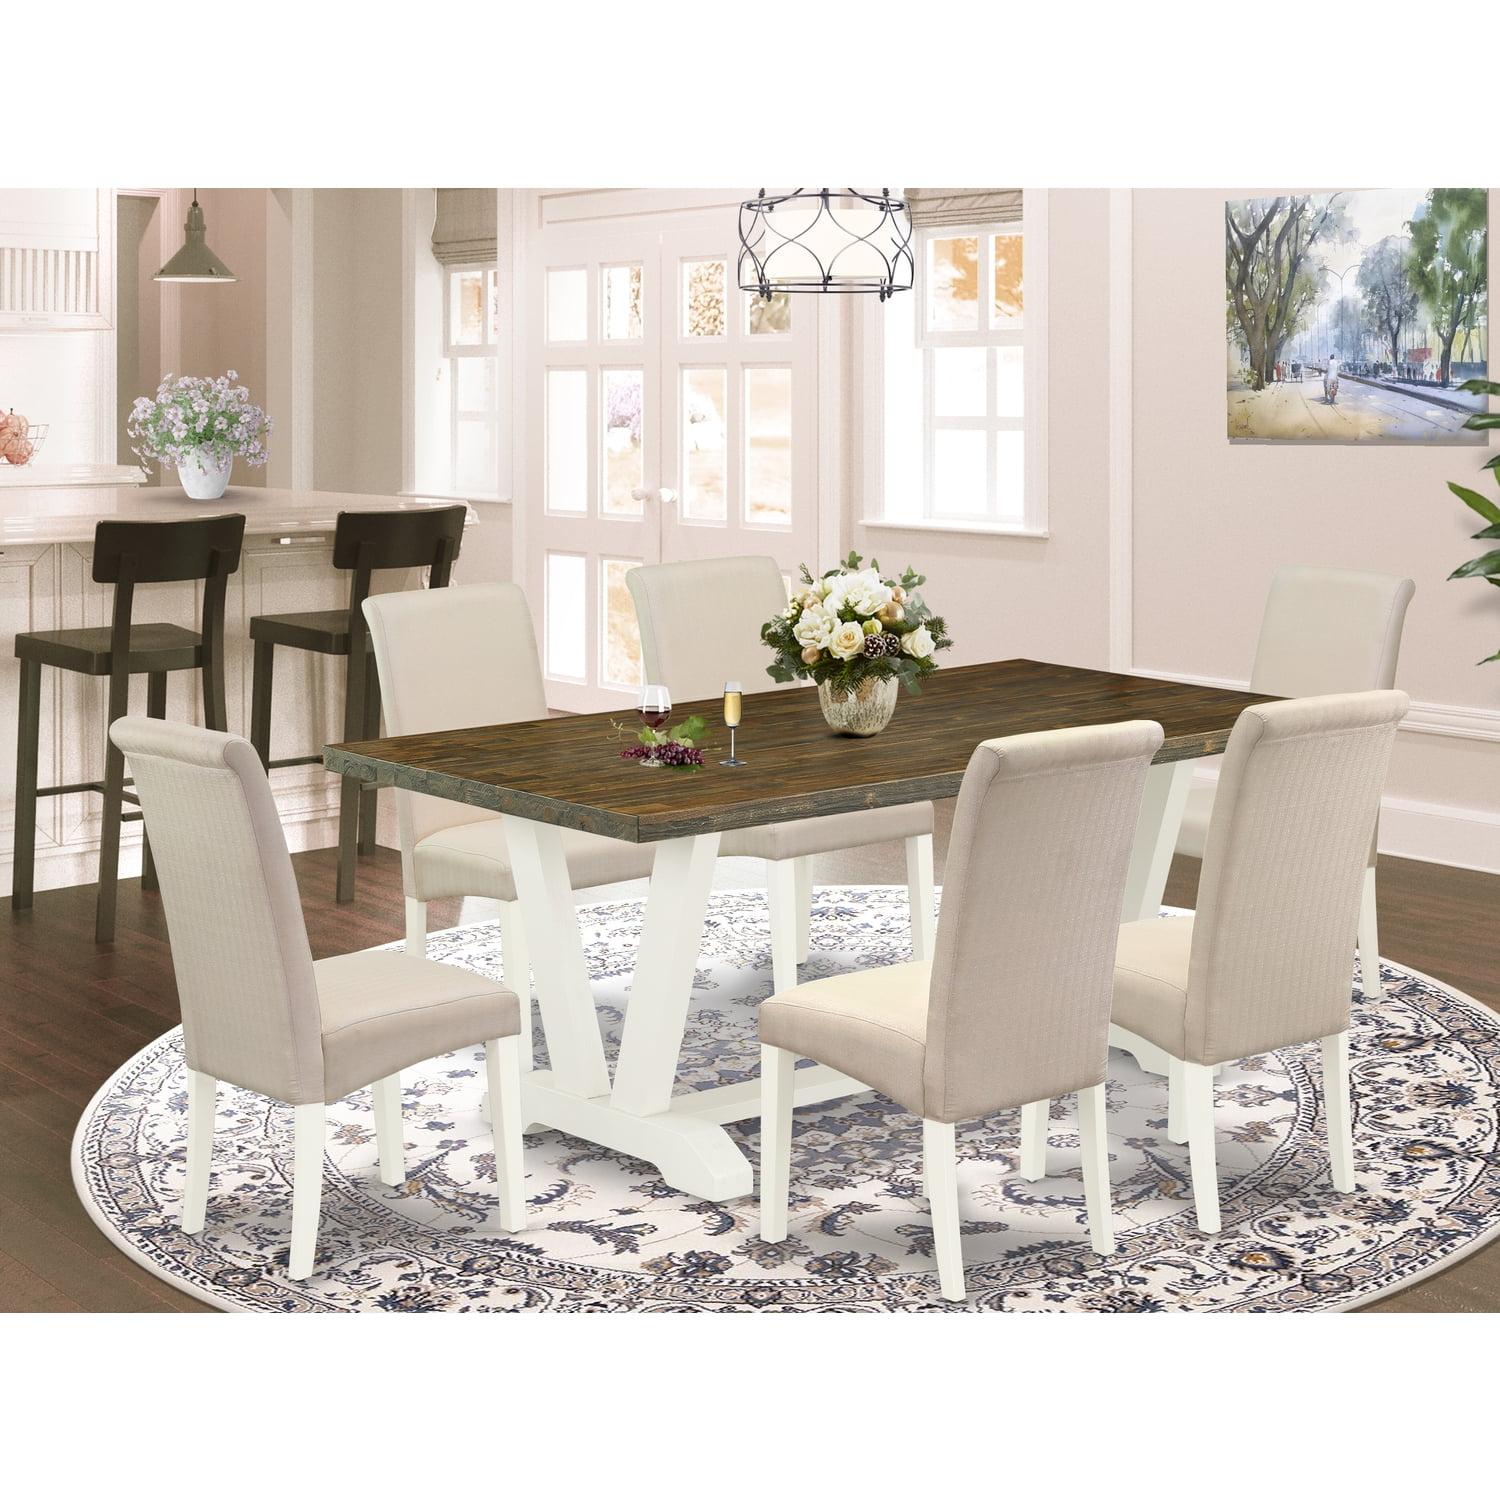 Elegant Linen White 7-Piece Dining Set with Cream Tufted Chairs